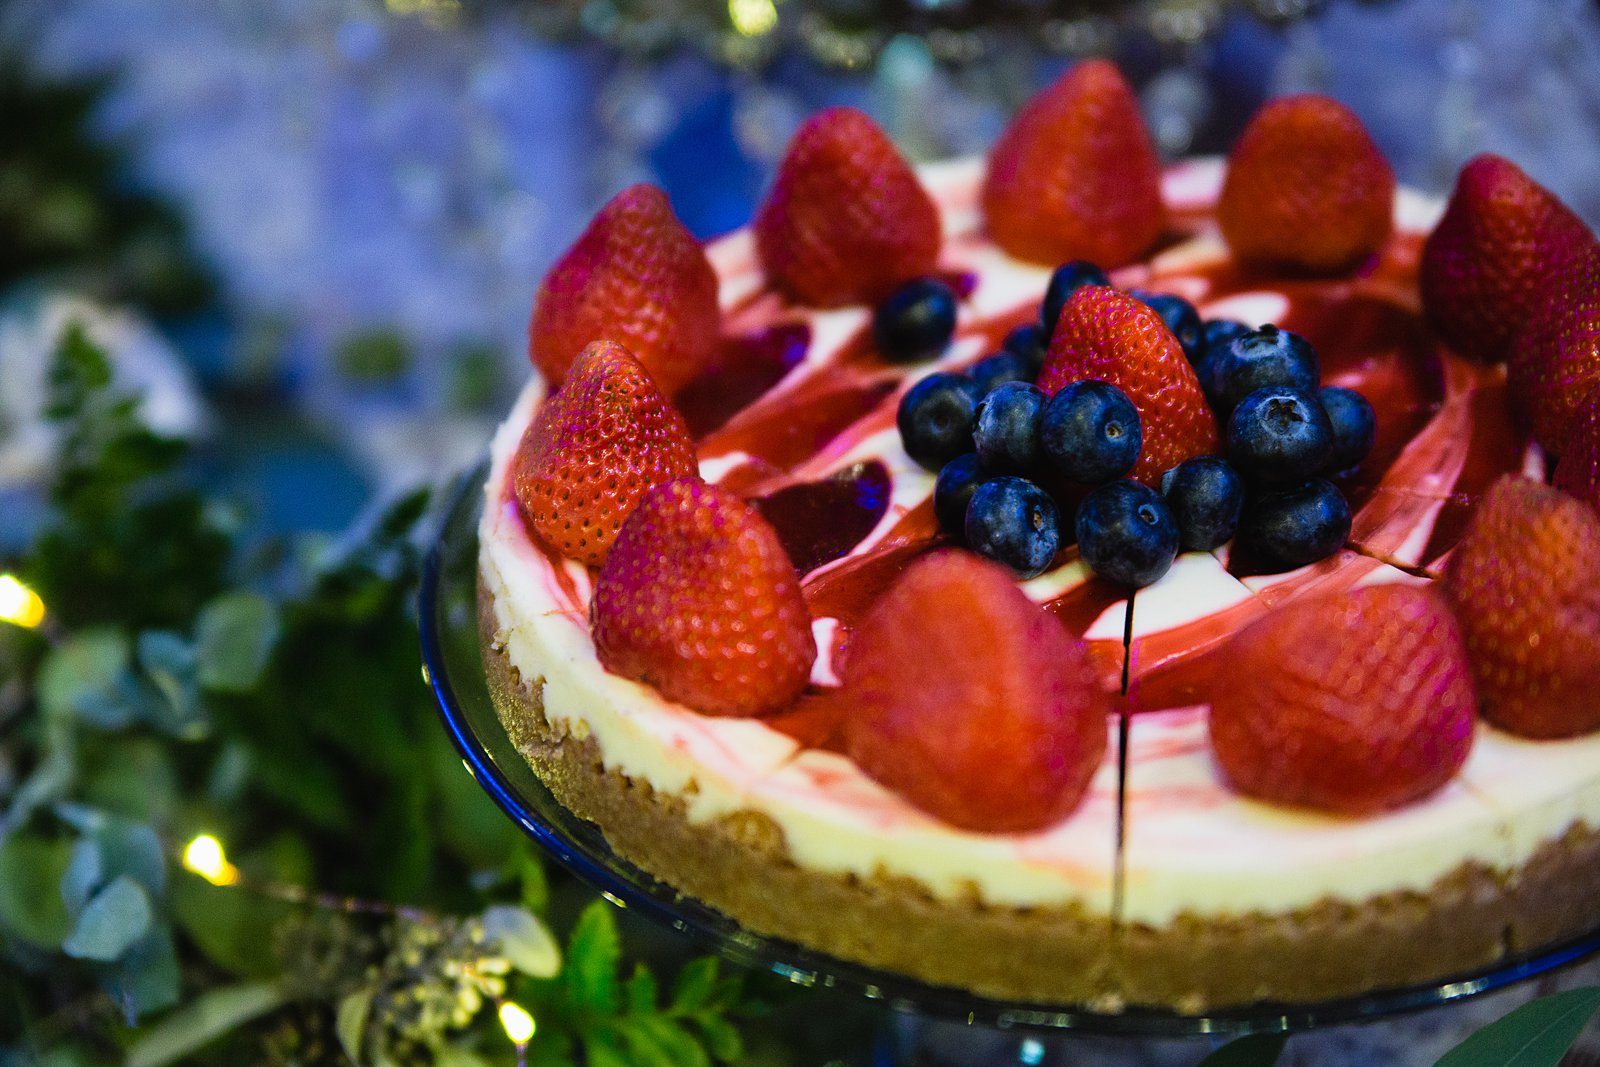 Wedding cheesecake wedding cake alternative with fresh strawberries and blueberries by PMA Photography.